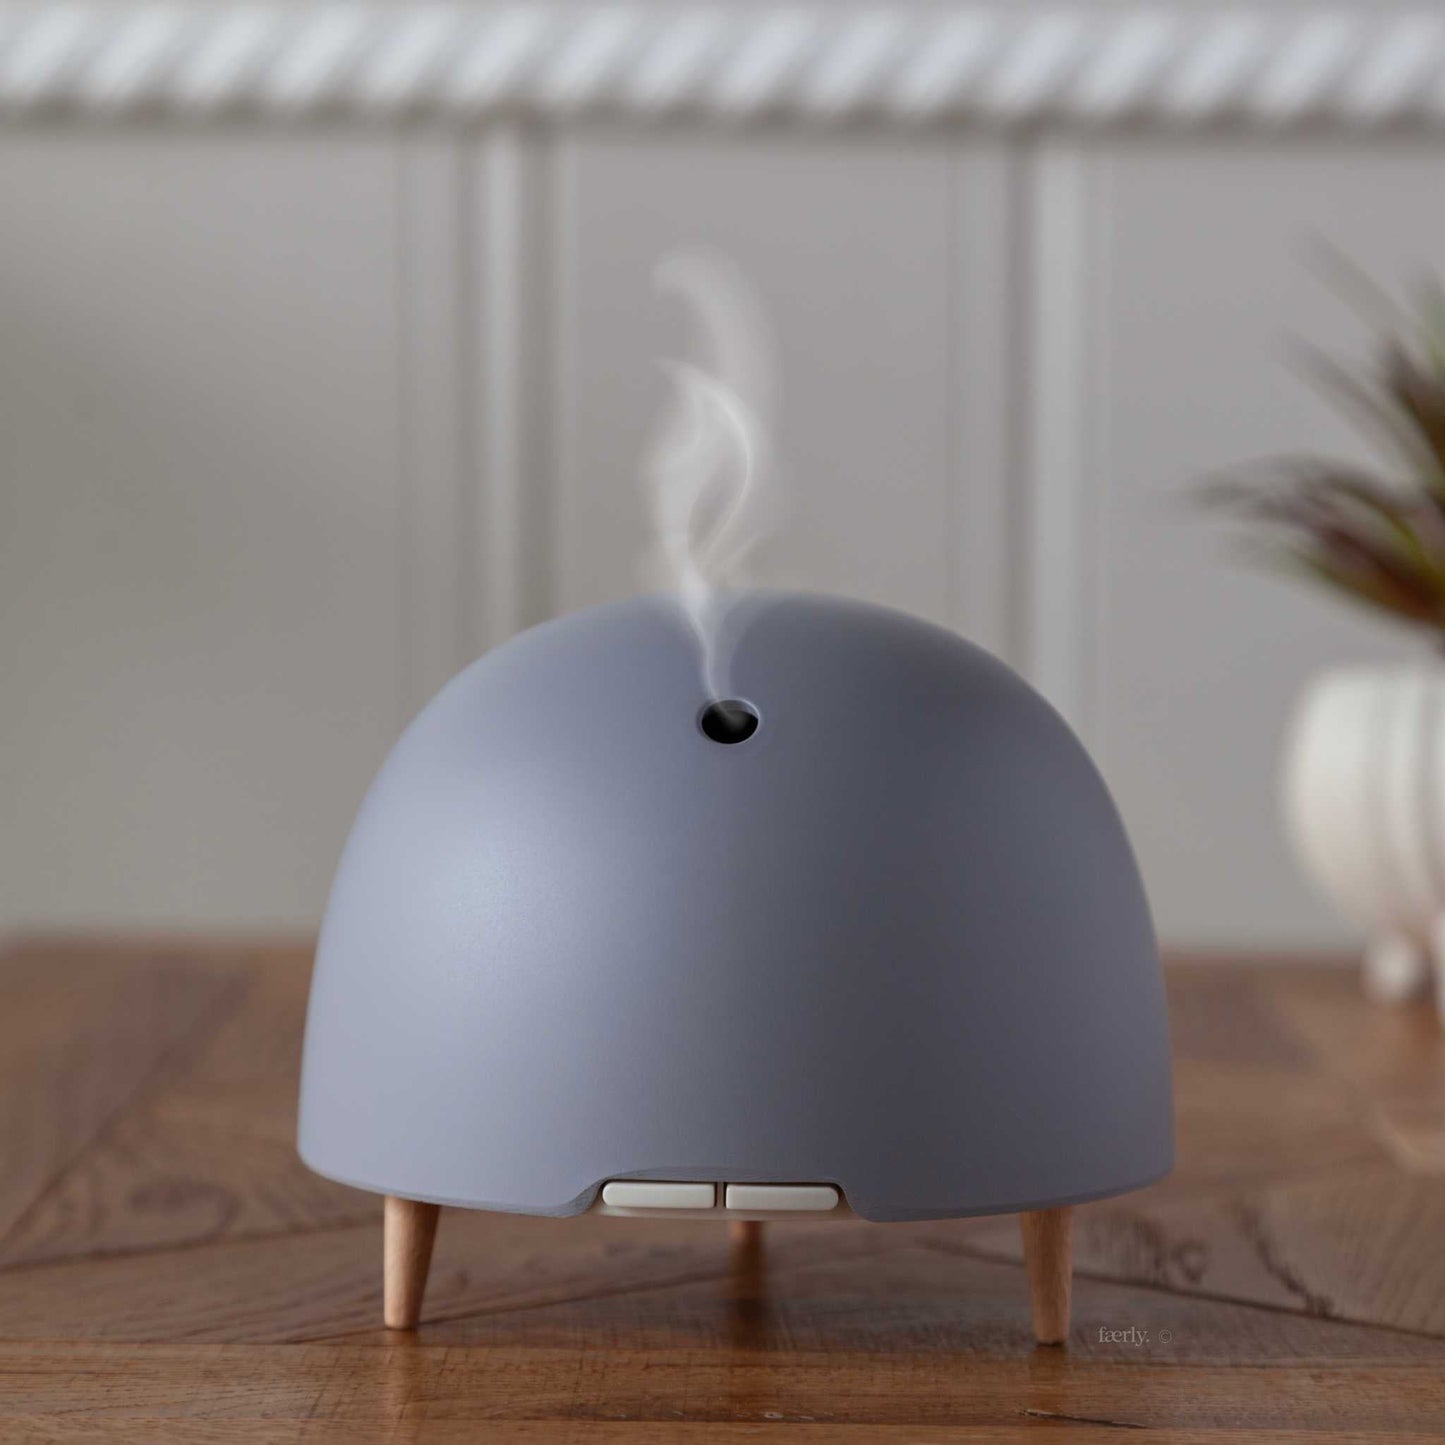 The Nature of Things Essential Oil Essential Oil Diffuser - Maël - Lavender - The Nature of Things